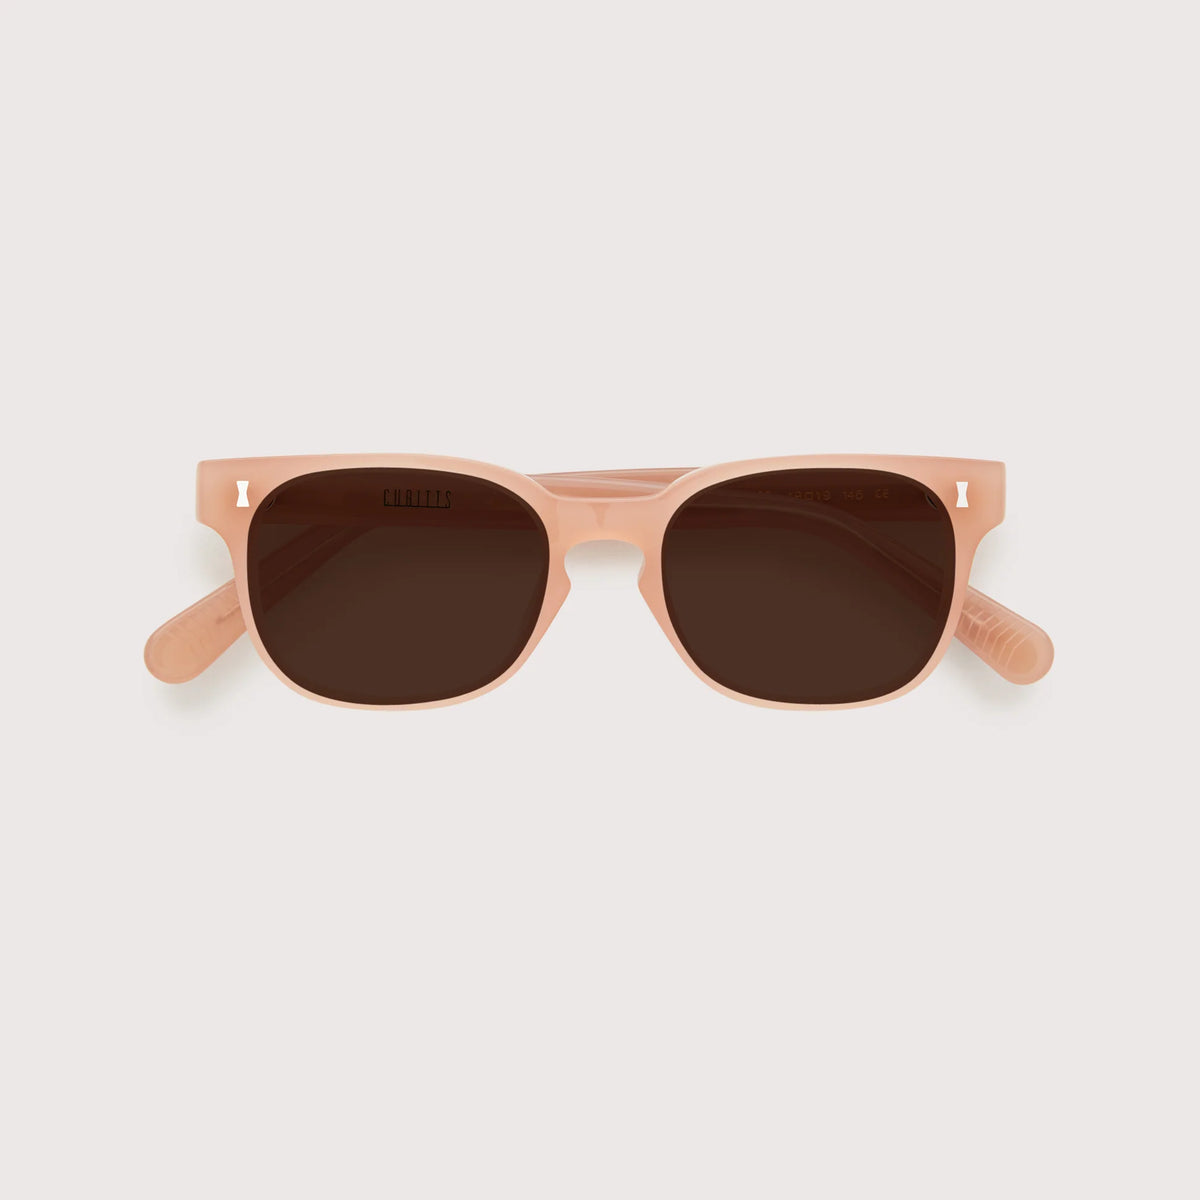 Apricot Cubitts Blundell sunglasses